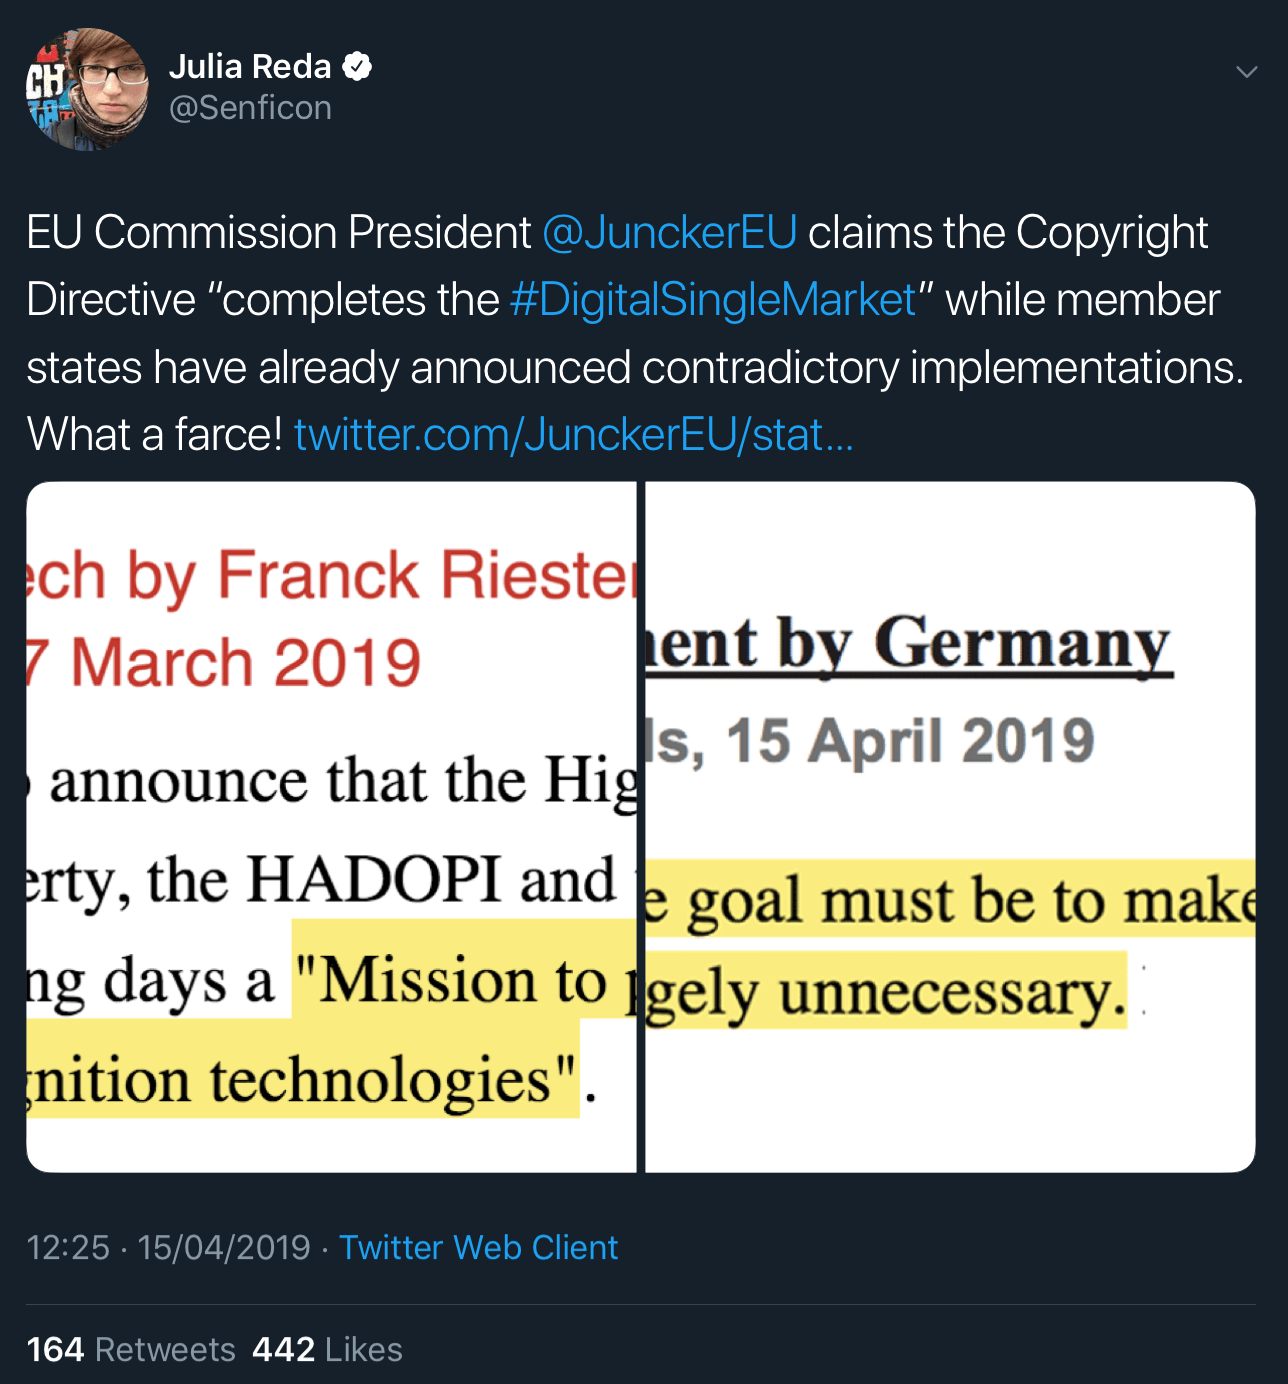 Julia Reda’s tweet about France and Germany’s conflicting statements on Article 13’s requirement for online platforms to start using upload filters.